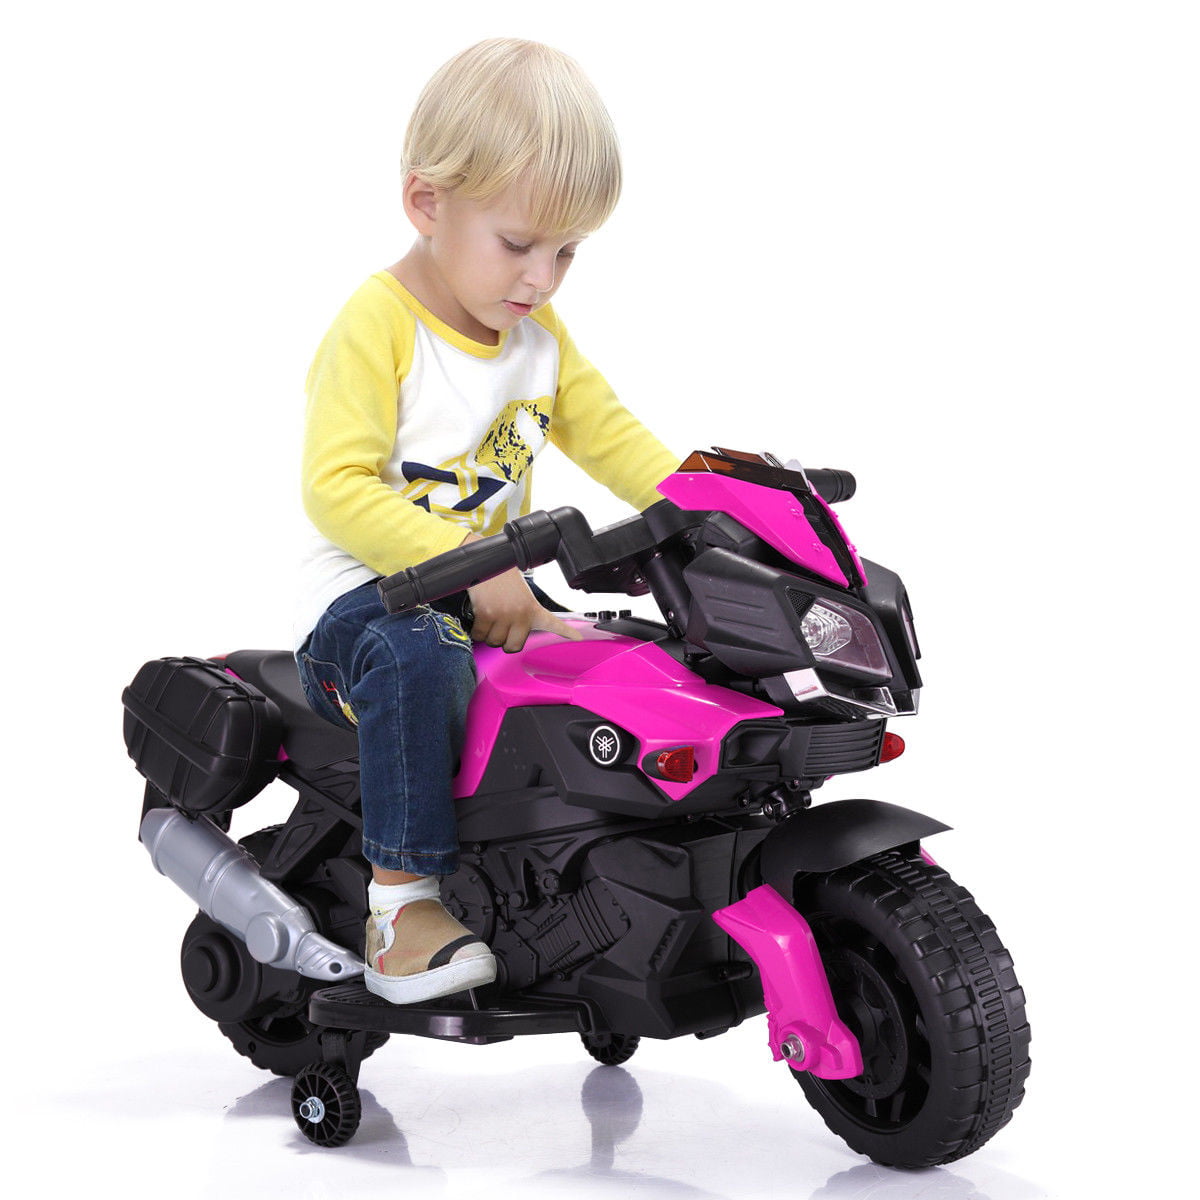 Veryke Kids Electric Battery-Powered Ride-On Motorcycle Dirt Bike Toy for Kids, 4 Wheeler Gifts Pink Motorcycle for Children Child Boys